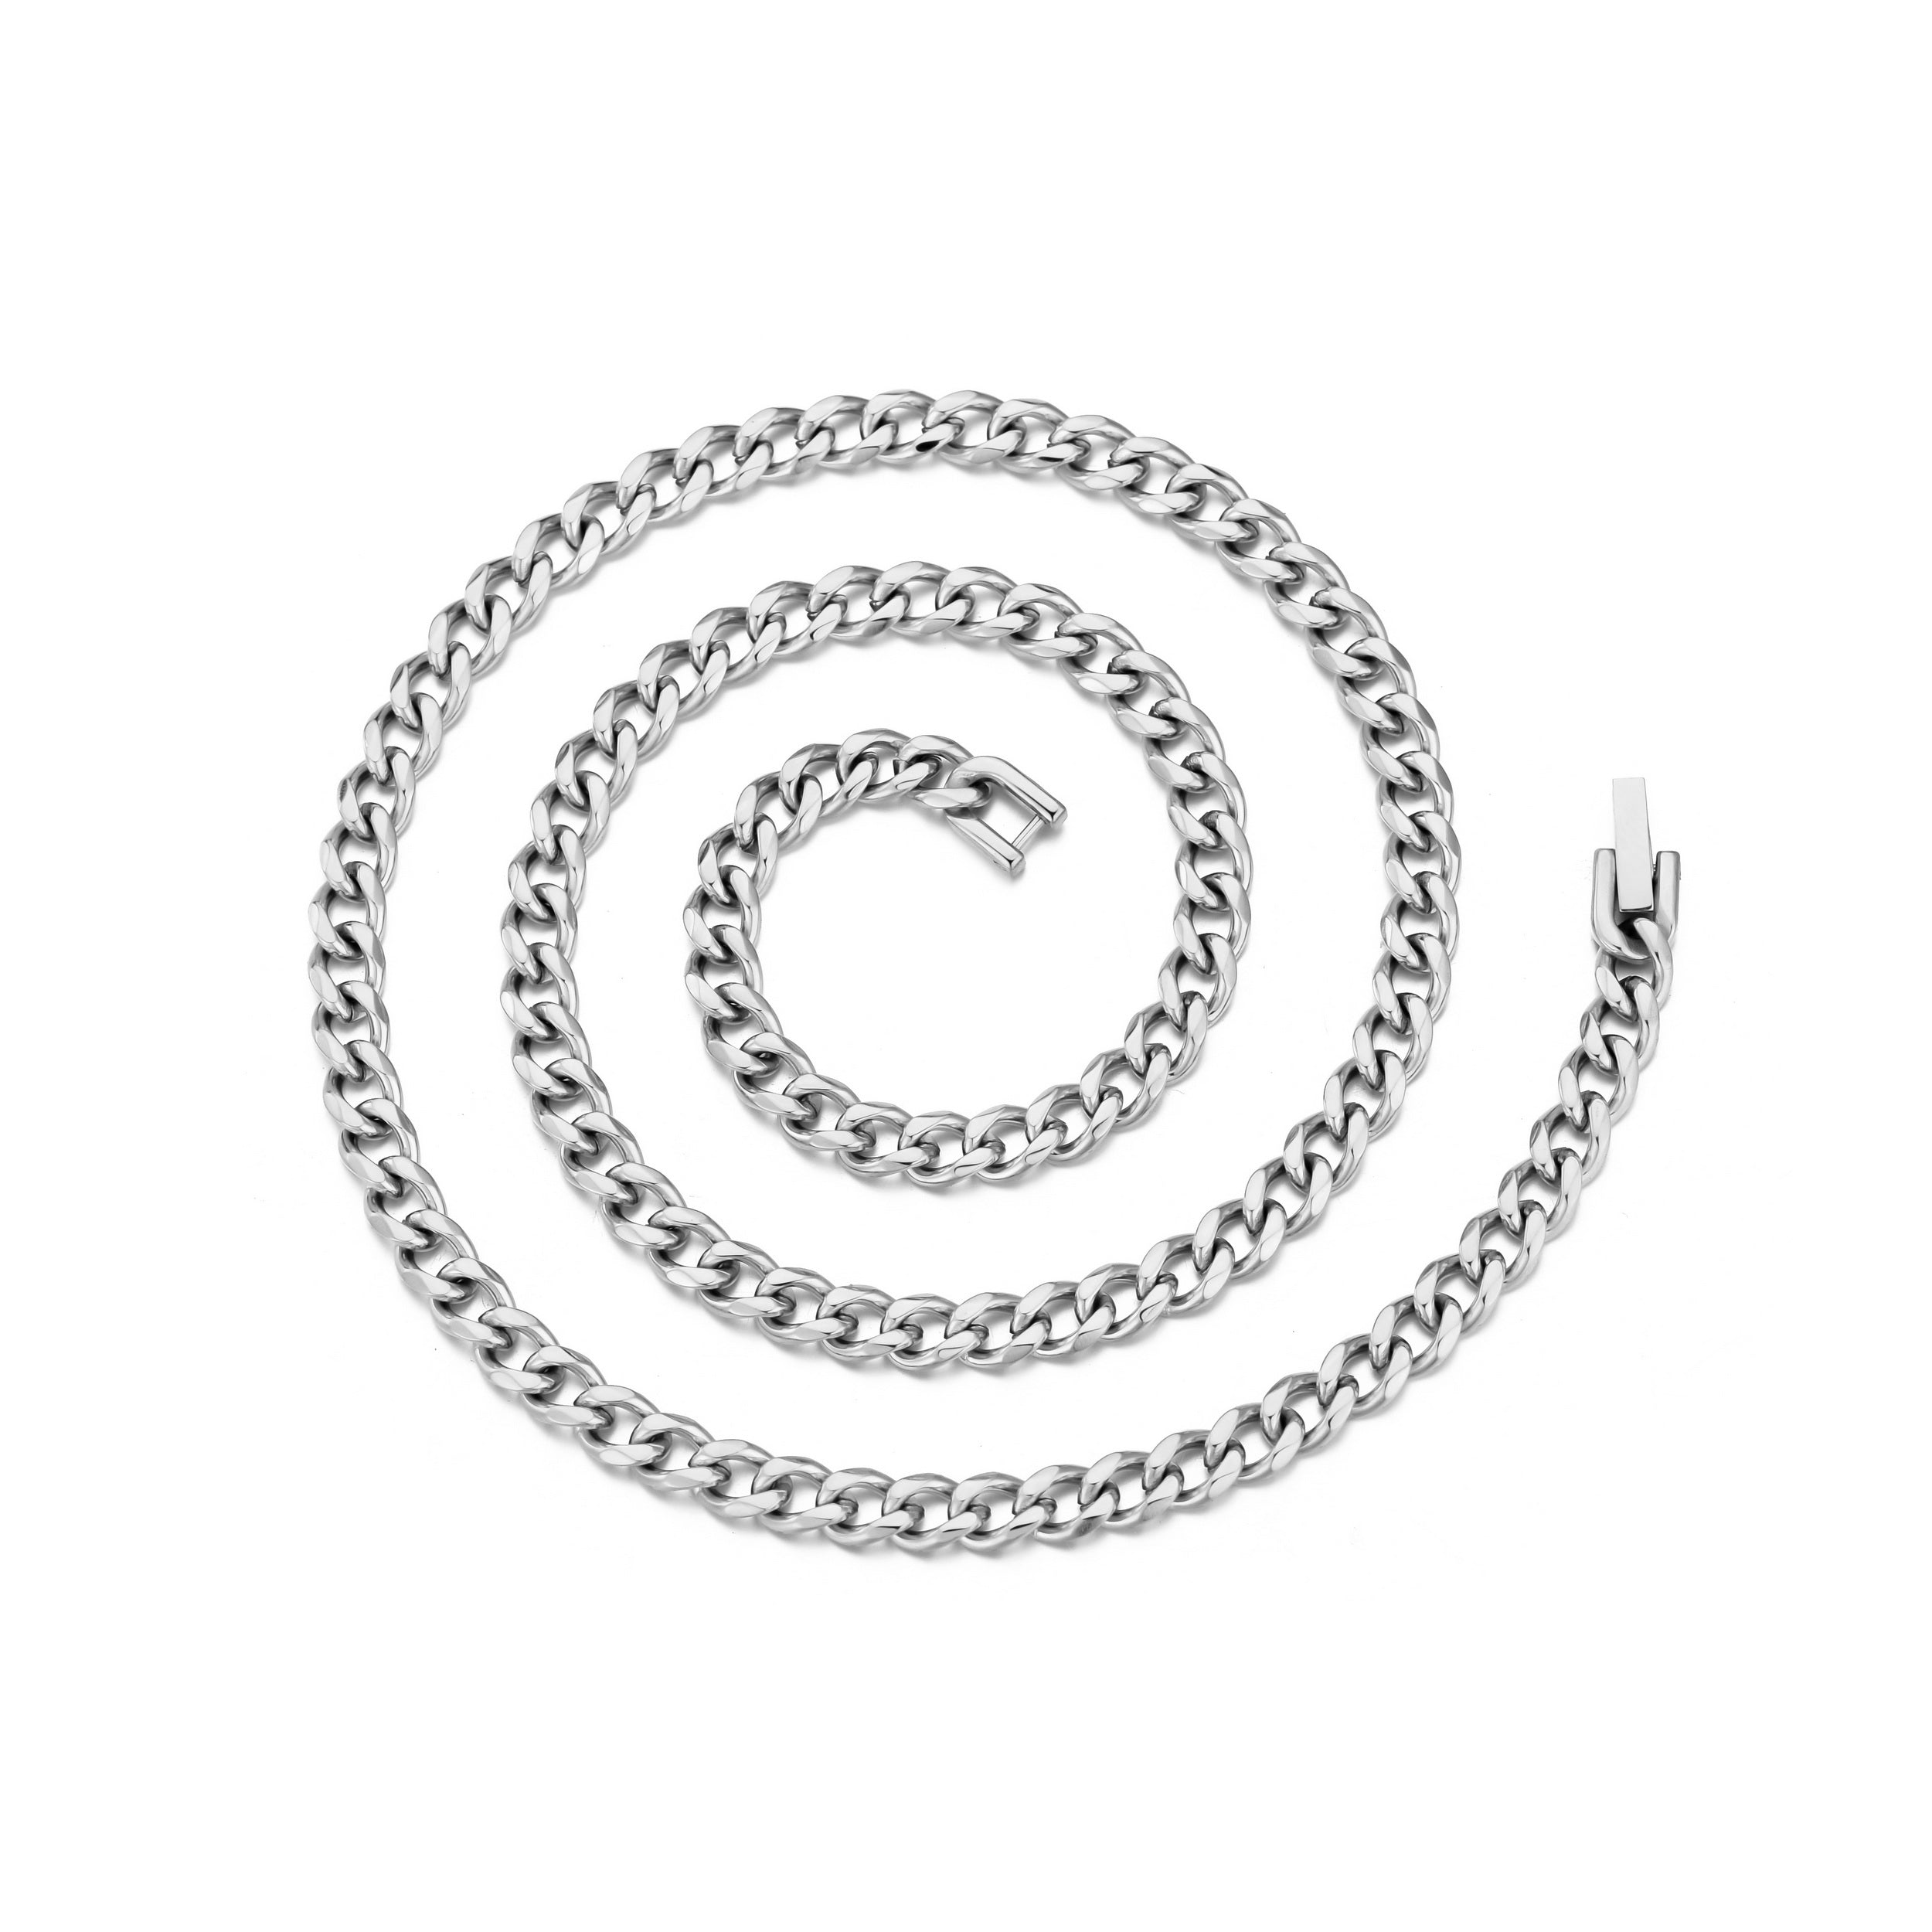 Men's 6mm Stainless Steel 18-24 Inch Cuban Curb Chain Necklace